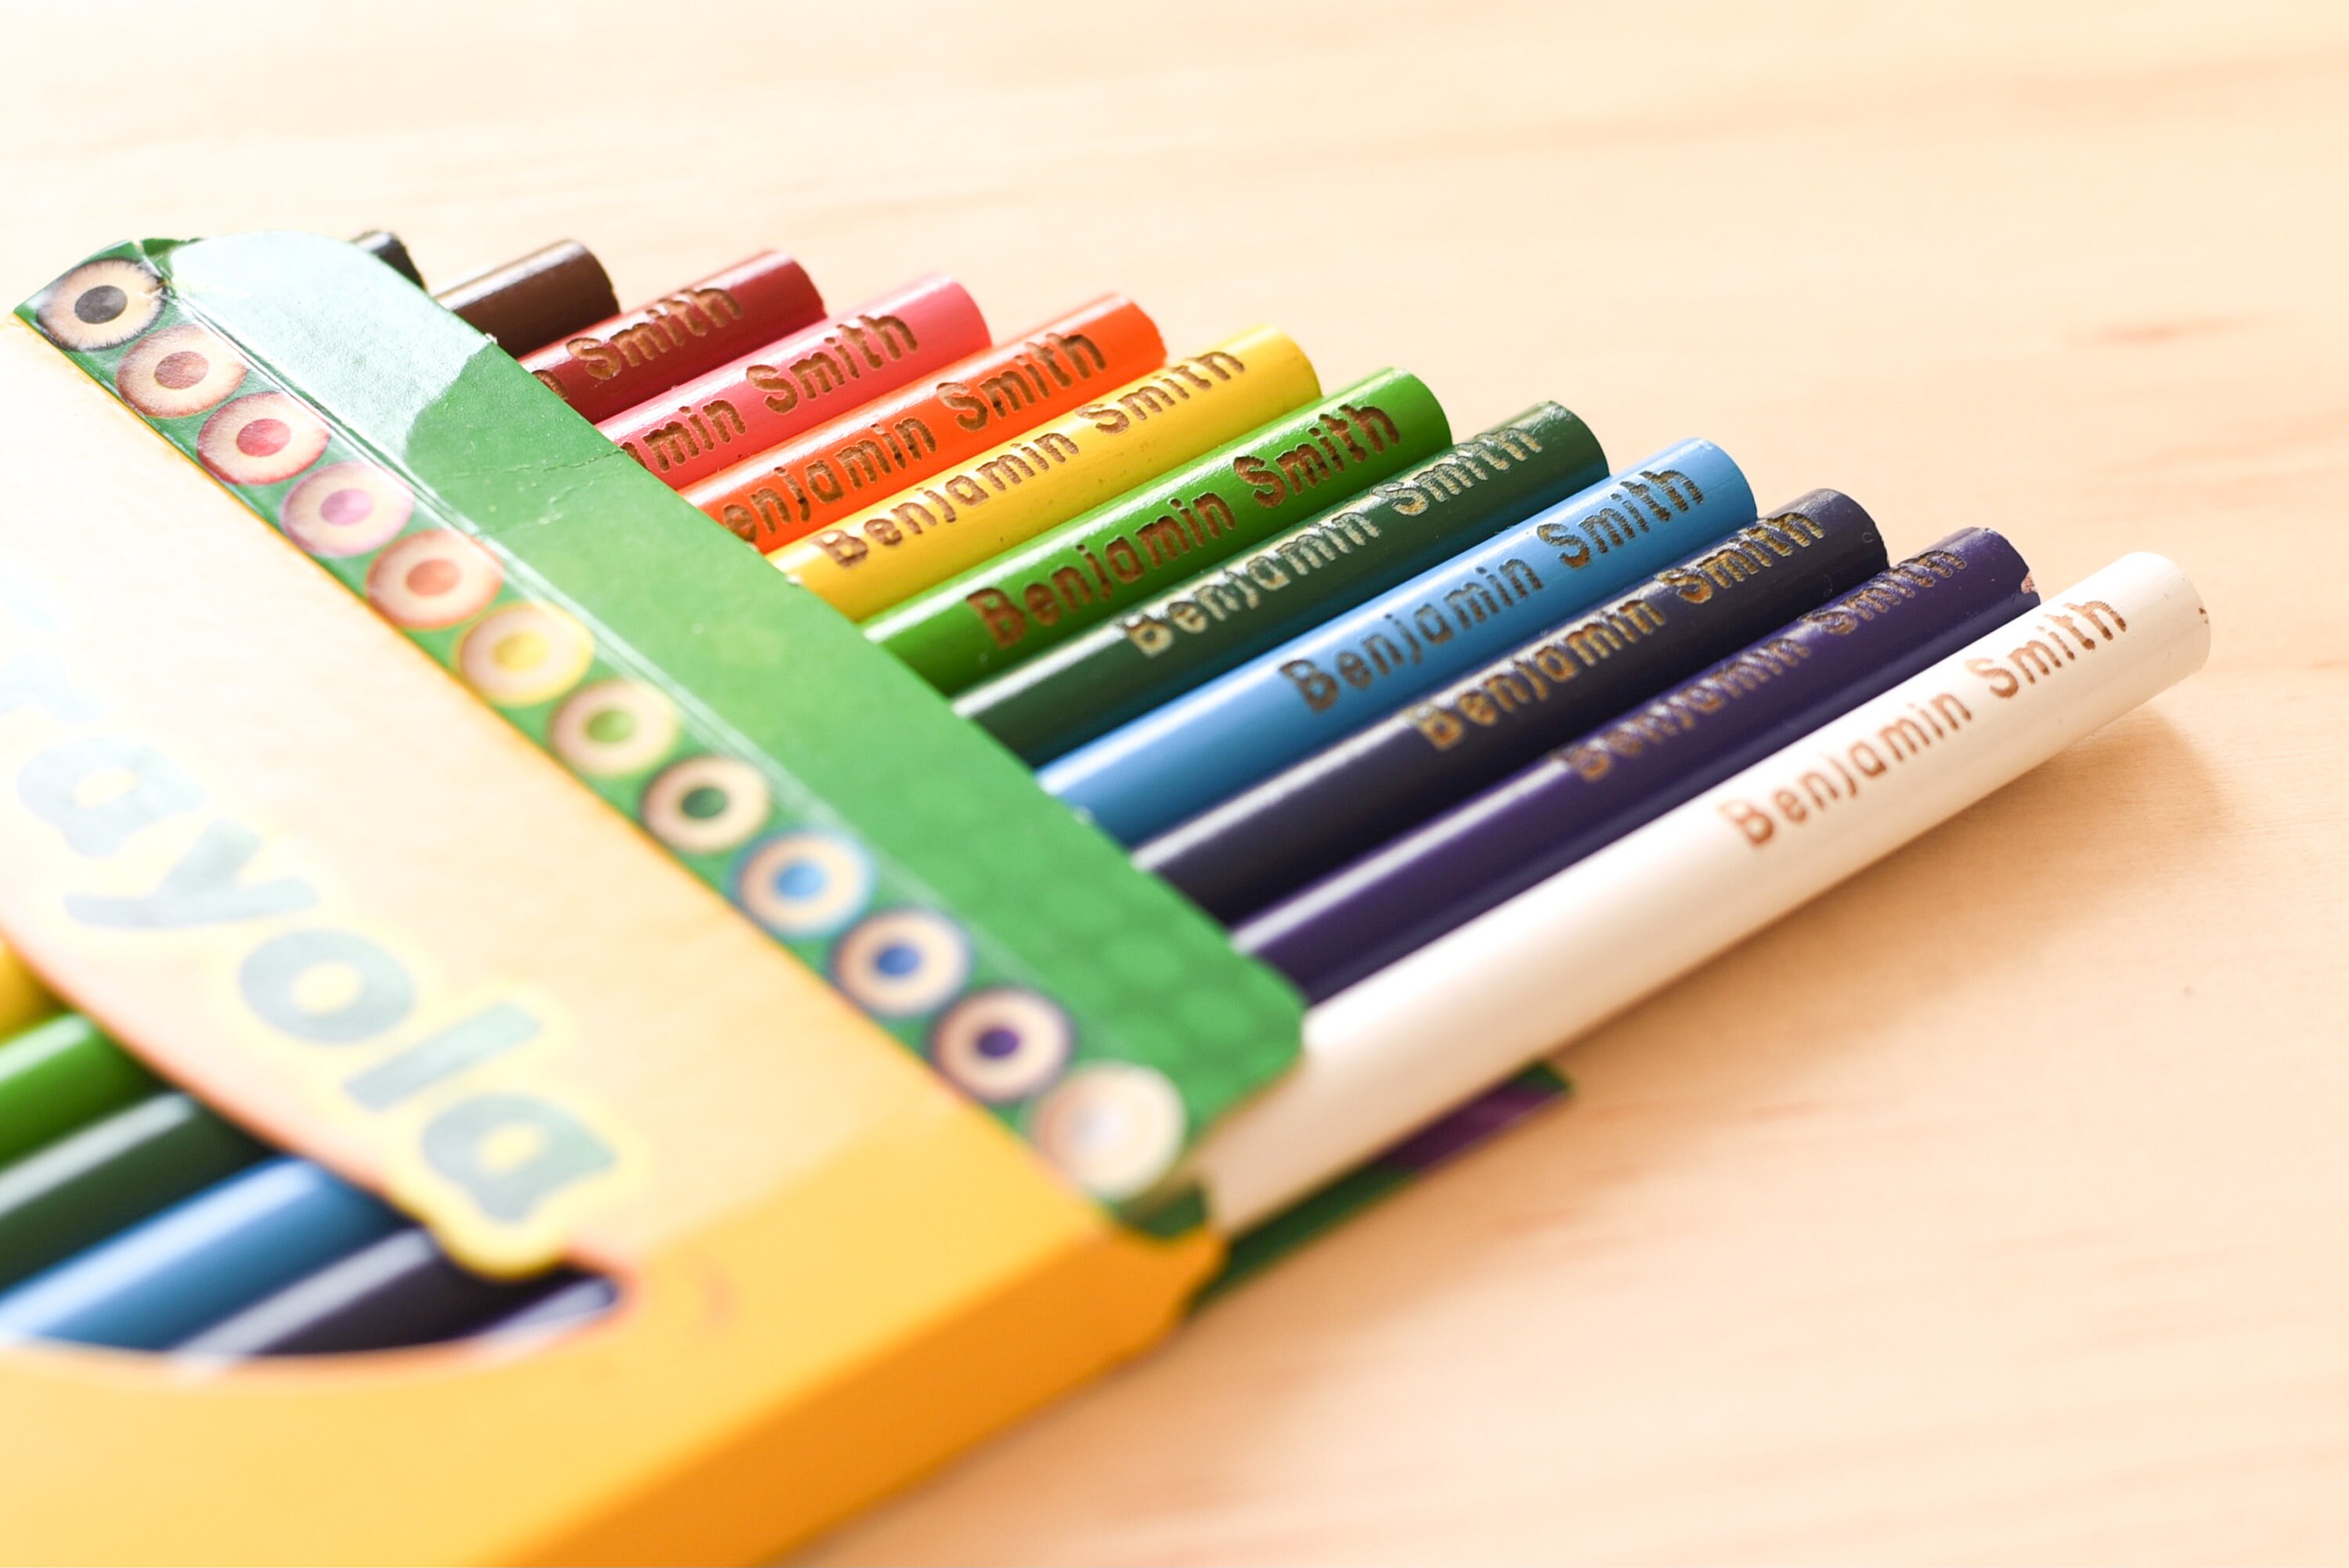 15 Jumbo Coloring Pencils With Color Names, Coloring Pencil, Back to  School, Crayons, Personalized Pencils, School Supplies, Color Blindness 